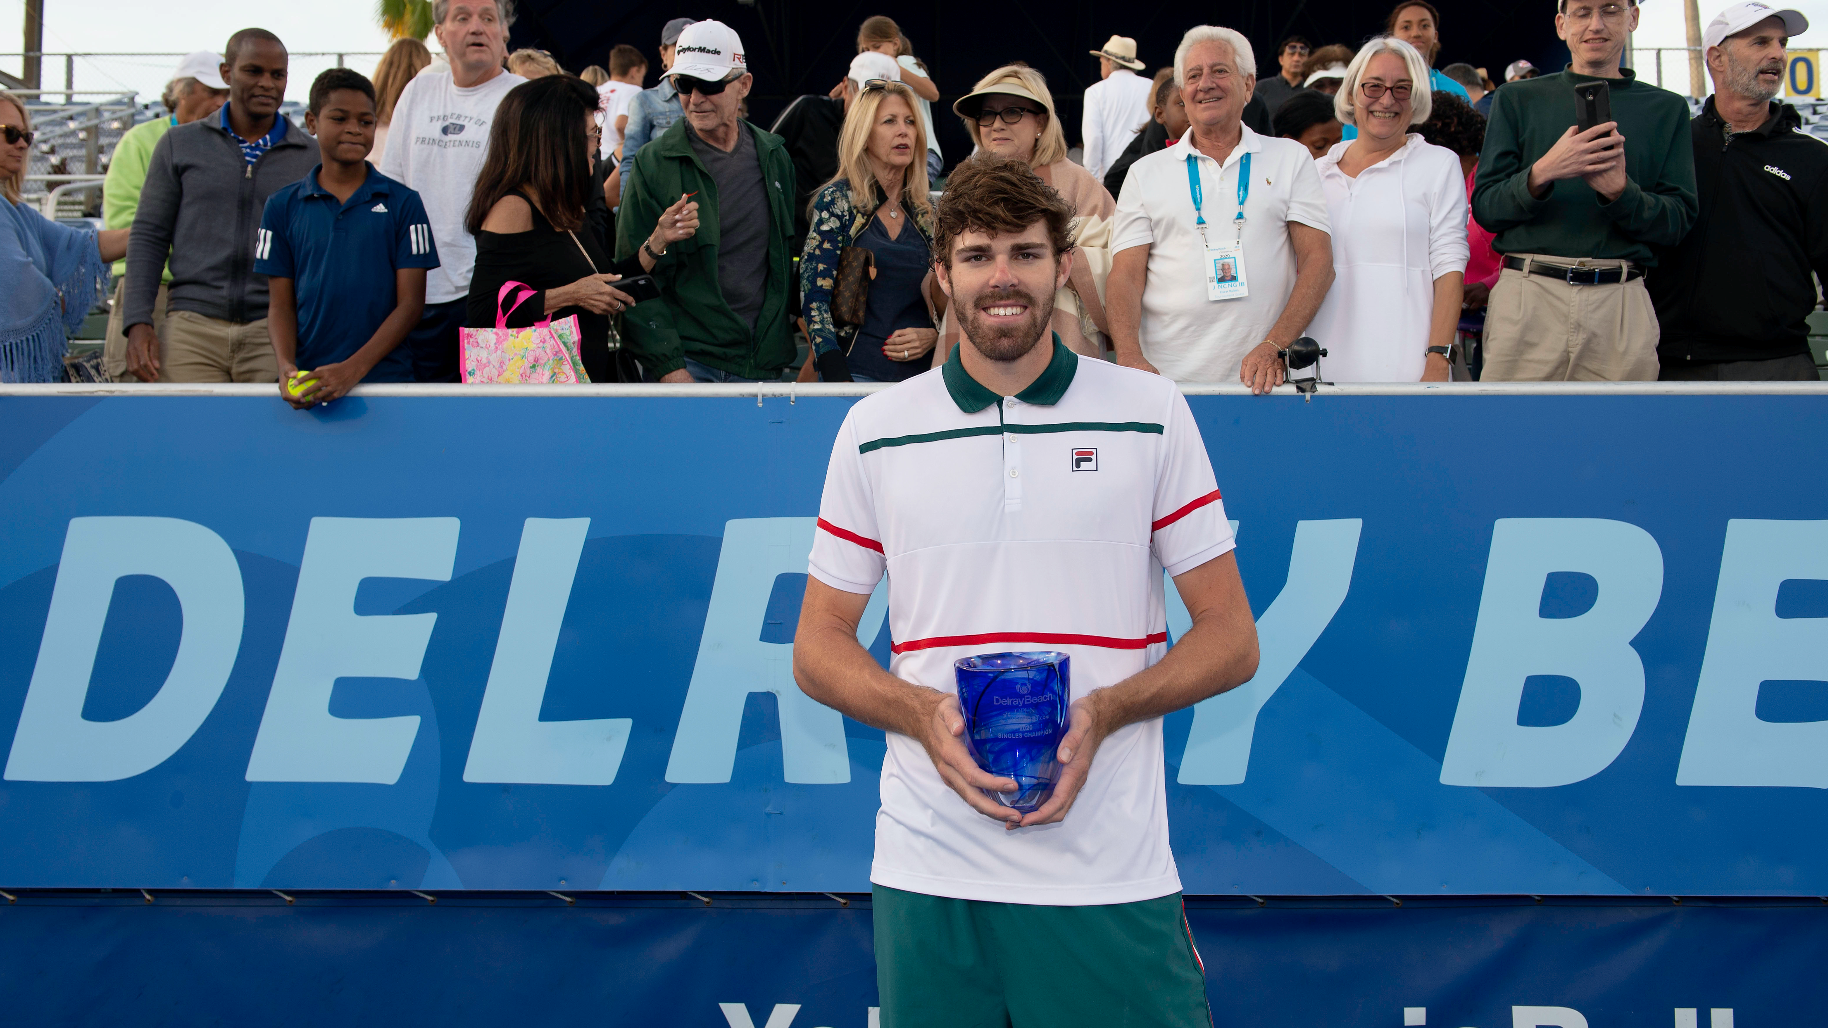 Opelka Serves His Way to Delray Beach Title